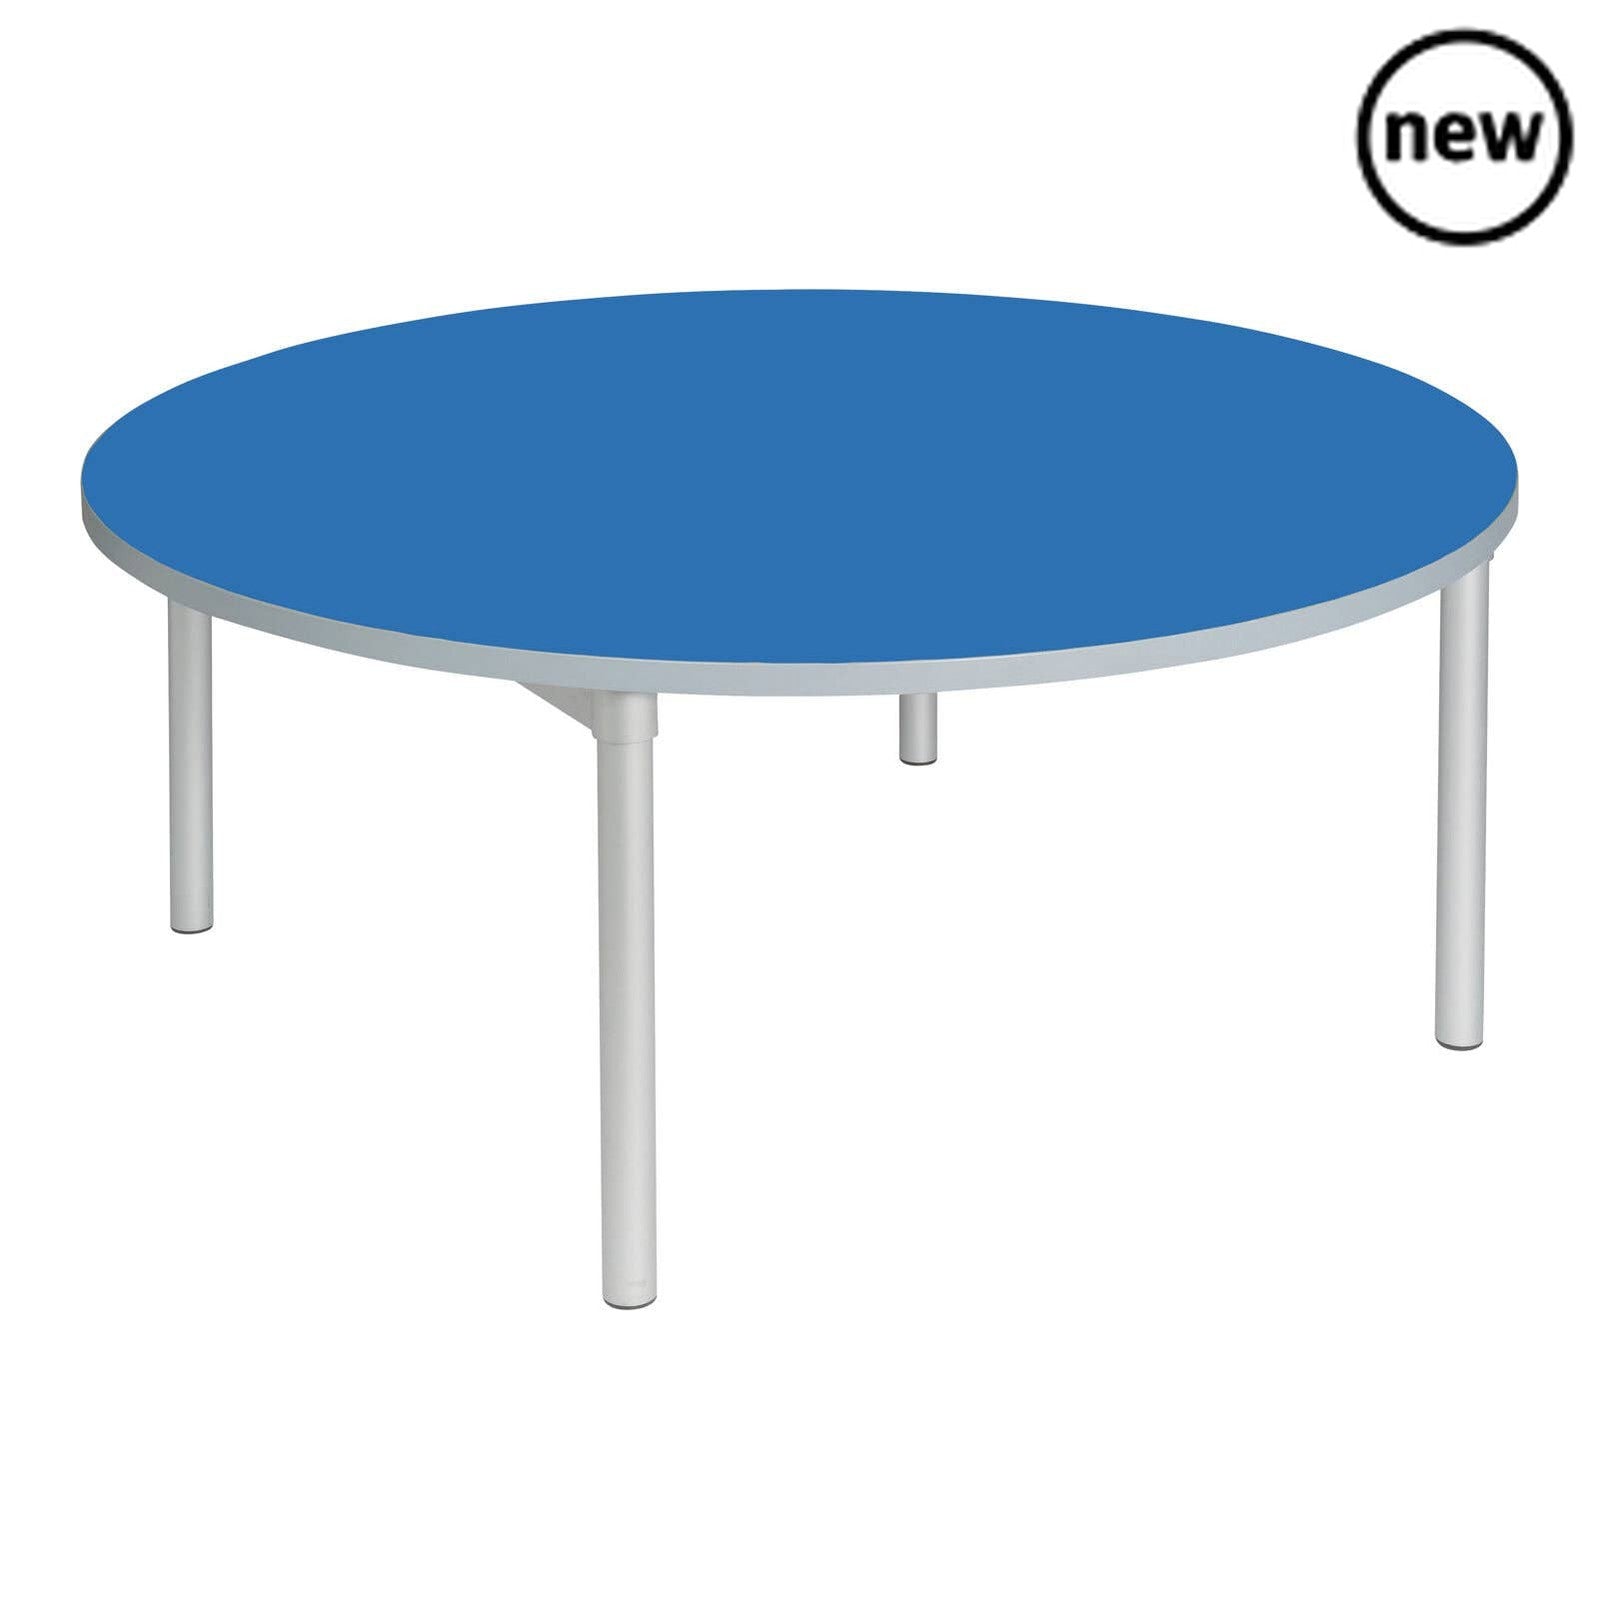 Gopak Enviro Round Classroom Table, The Gopak Enviro Round Classroom Table is a versatile and lightweight table that is perfect for various uses, including as a classroom table, dining table, or for reception and breakout spaces. With a diameter of 1200mm, this table is spacious enough for multiple users and can easily accommodate various tasks.The table is available in a choice of heights and colors, allowing you to customize it to suit your specific needs and preferences. Whether you need a table for youn